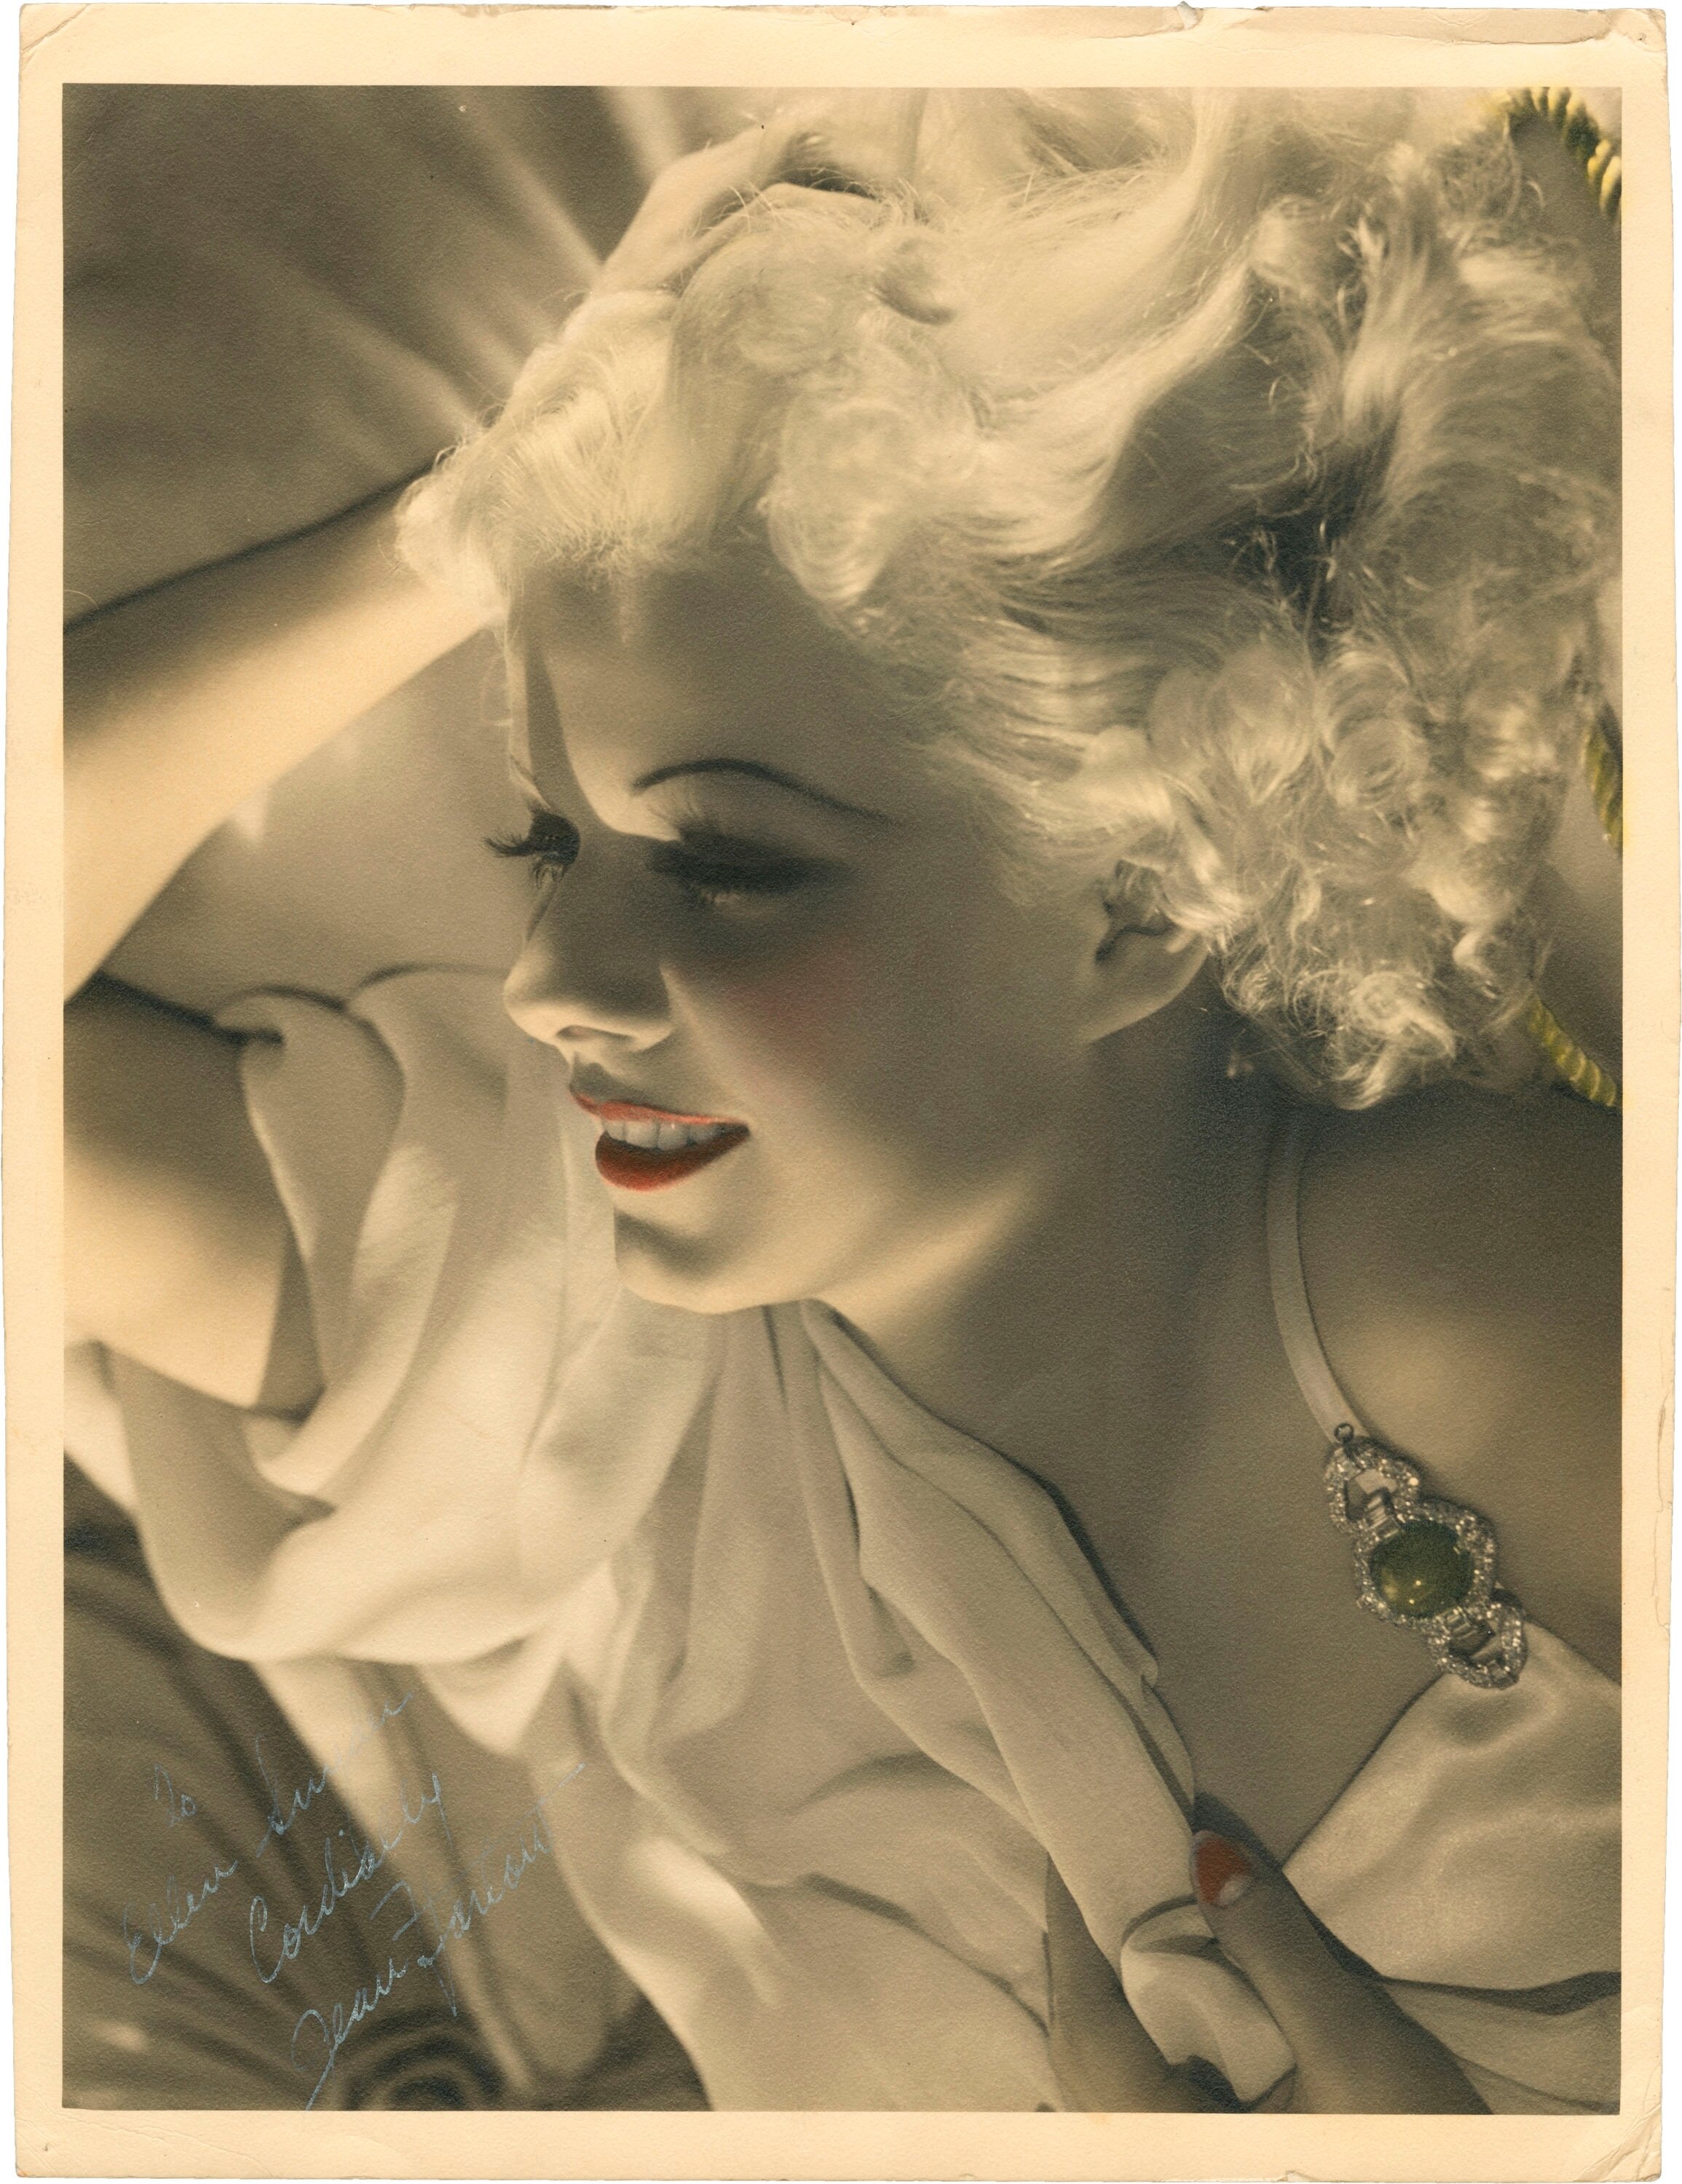 Jean Harlow By George Hurrell Mgm 1930s Mother Harlow Signed Lot 83191 Heritage Auctions 